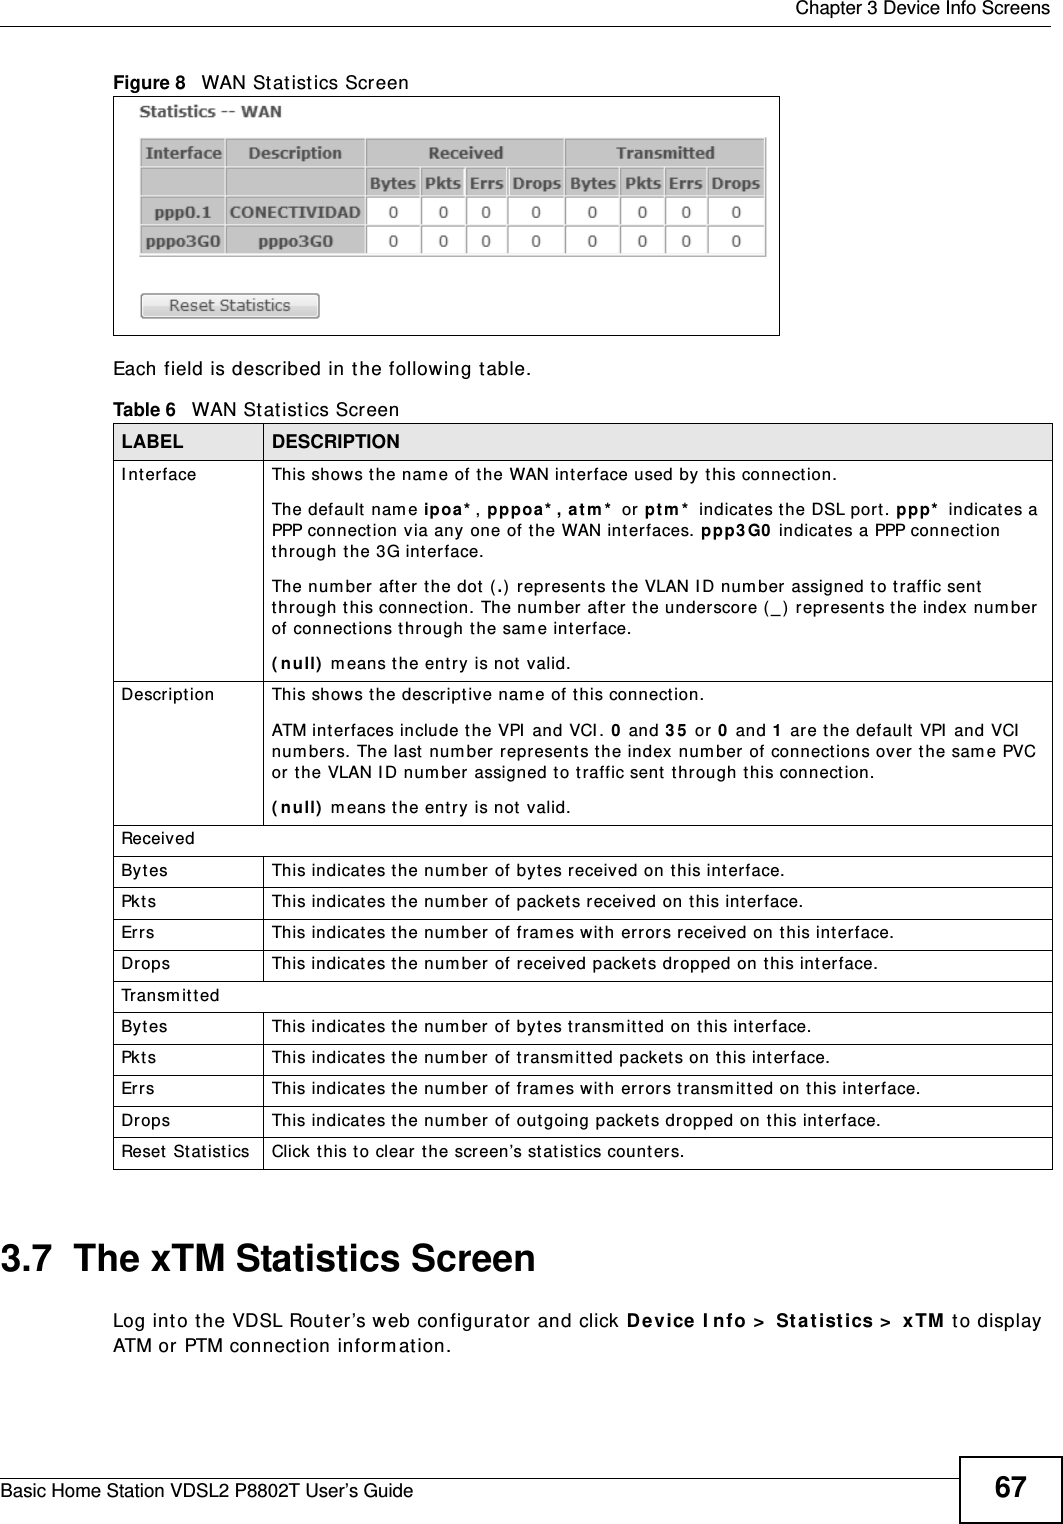  Chapter 3 Device Info ScreensBasic Home Station VDSL2 P8802T User’s Guide 67Figure 8   WAN St at istics ScreenEach field is described in the following table.3.7  The xTM Statistics Screen Log int o the VDSL Router’s web configurat or and click Device I nfo &gt;  St a t ist ics &gt;  xTM  to display ATM or PTM connect ion inform at ion.Table 6   WAN St at ist ics ScreenLABEL DESCRIPTIONI nterface This show s the nam e of the WAN interface used by this connect ion.The default nam e ipoa* , p ppoa * , at m *  or ptm *  indicat es the DSL port. ppp*  indicates a PPP connection via any one of the WAN int er faces. ppp3 G0  indicates a PPP connect ion through t he 3G int erface.The num ber aft er t he dot  (.)  represent s the VLAN I D num ber assigned to t raffic sent  through this connect ion. The num ber  aft er the underscor e ( _) represent s the index num ber of connect ions through the sam e int erface.( null)  m eans the ent ry is not valid.Descr iption This show s the descript ive name of t his connect ion.ATM int er faces include t he VPI  and VCI . 0  and 3 5  or 0 and 1 ar e the default  VPI  and VCI num ber s. The last  num ber represents t he index num ber  of connect ions over  t he sam e PVC or the VLAN I D num ber assigned to t raffic sent  through t his connect ion.( null)  m eans the ent ry is not valid.ReceivedBy tes This indicates t he num ber of byt es received on this int erface.Pkt s This indicates the num ber of packet s received on this int erface.Errs This indicates the num ber of fram es wit h errors received on this interface.Drops This indicates t he num ber  of received packet s dropped on this inter face.Tr a n s m i t t e dByt es This indicates t he num ber of byt es t ransm it ted on t his int erface.Pkt s This indicat es t he num ber of transm itted packets on this int erface.Errs This indicates the num ber of fram es wit h errors transm it ted on this int er face.Drops This indicates the num ber of outgoing packet s dropped on this int erface.Reset  Statistics Click this to clear t he screen’s statist ics counter s.